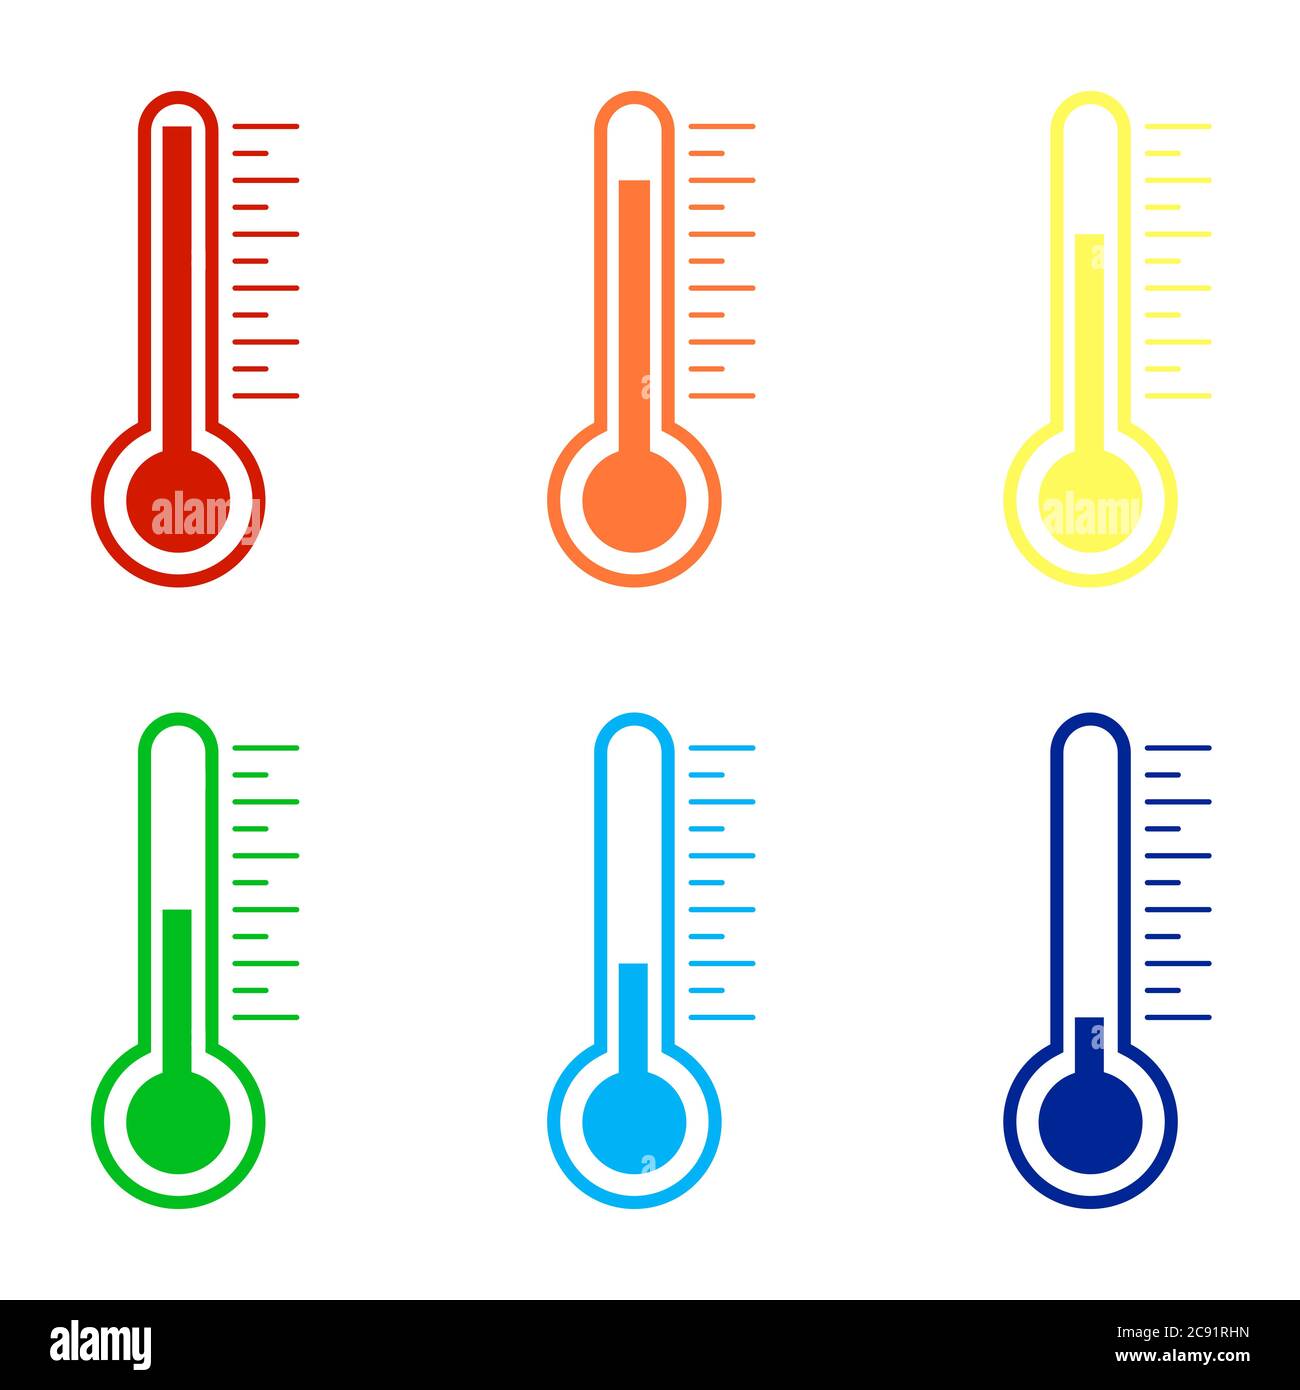 https://c8.alamy.com/comp/2C91RHN/thermometer-symbol-icons-in-different-colors-2C91RHN.jpg